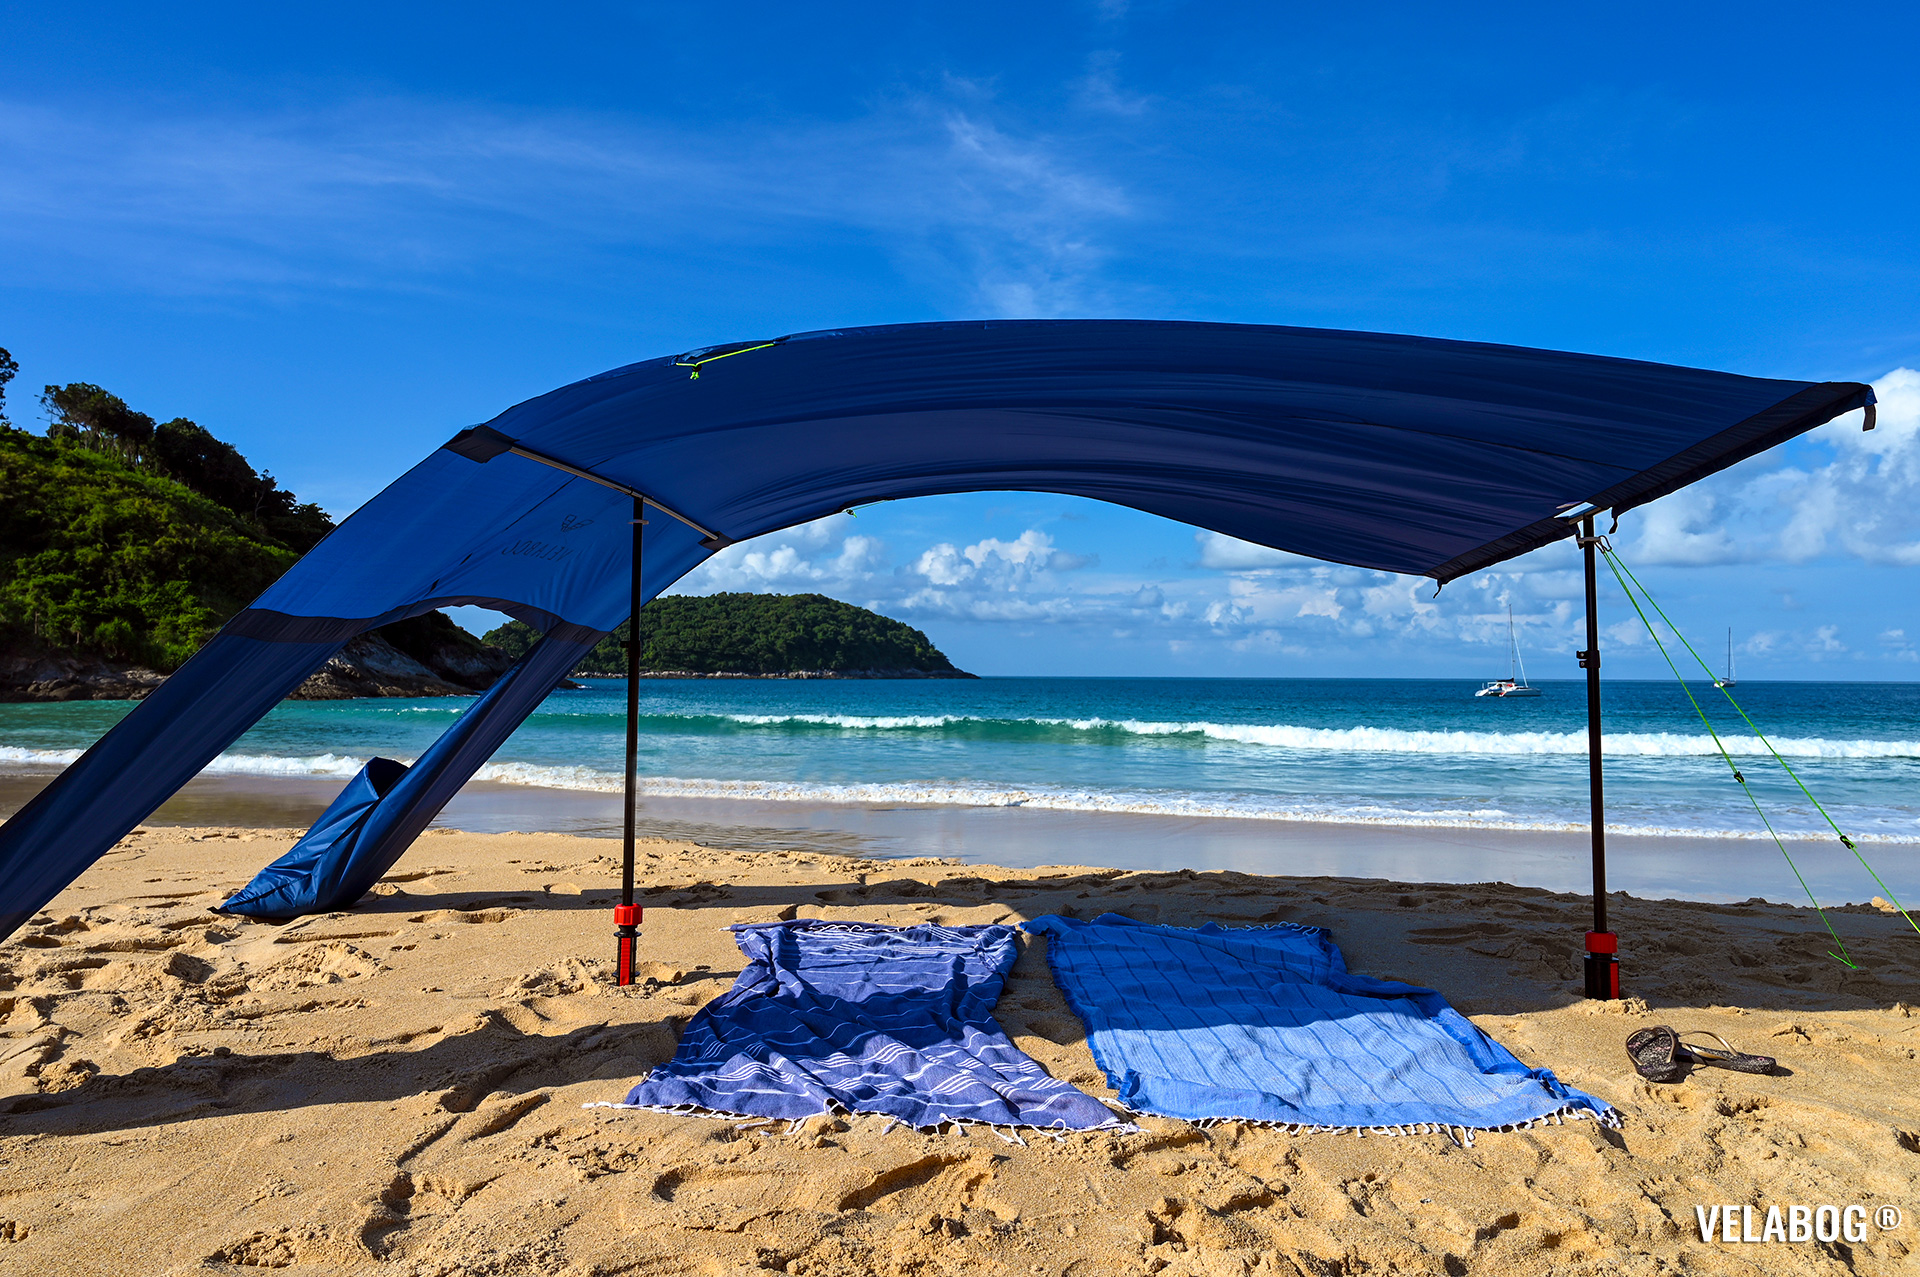 Beach sun sail Velabog Breeze, nightblue. Best beach sun canopy tent, sun shelter with excellent wind stability by each wind type. Setup option with extension set for no, light or gusty wind. Side view. Details.